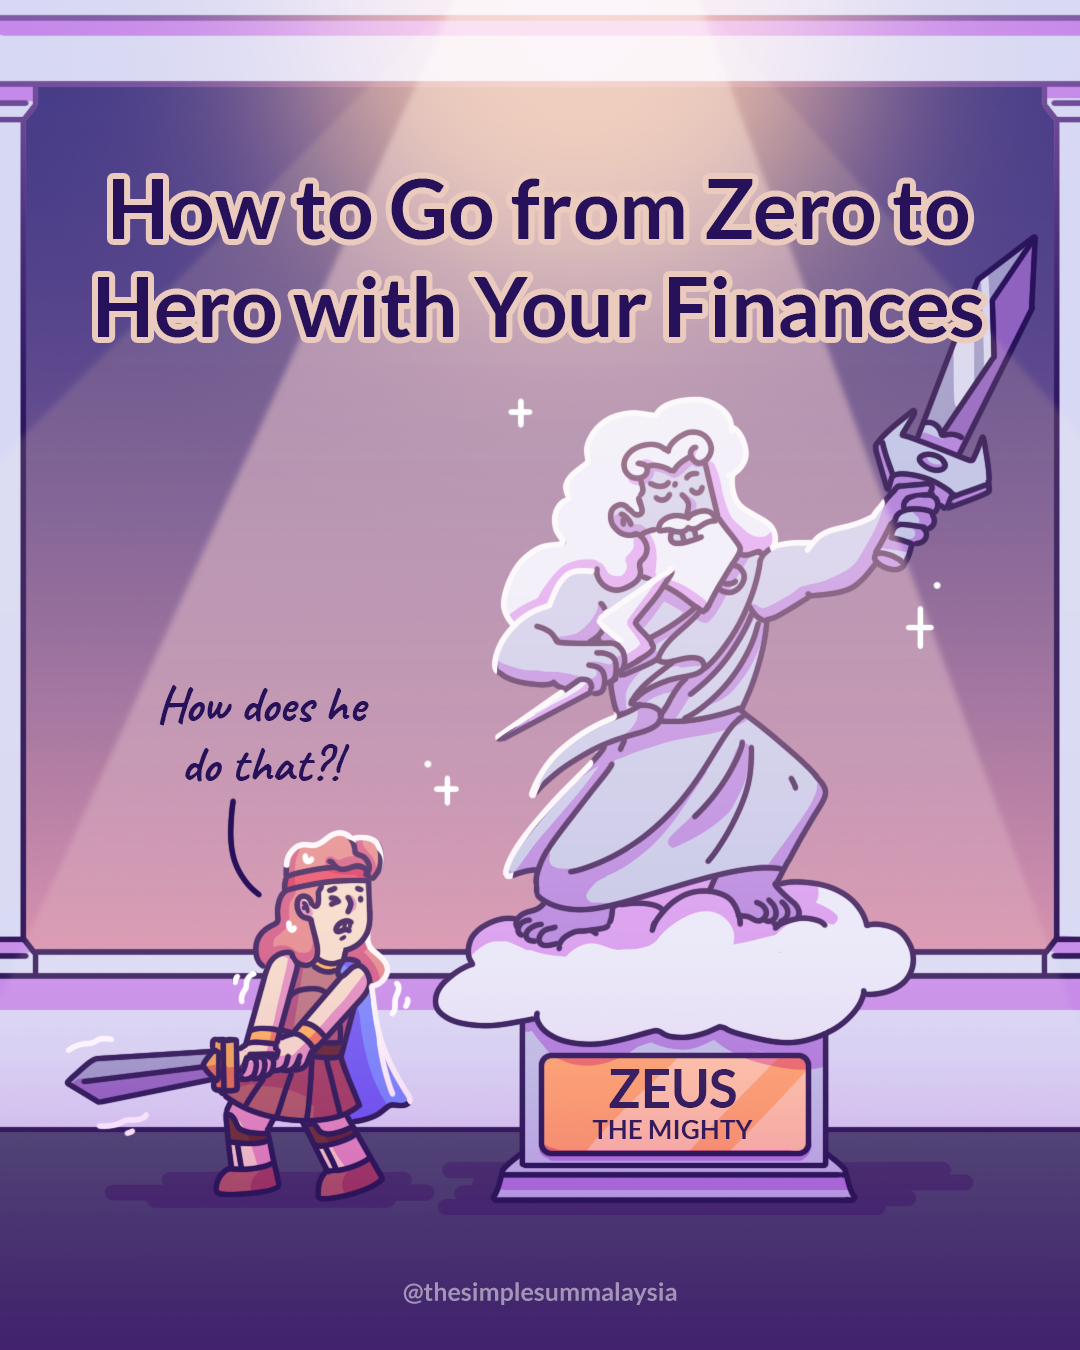 How to Go from Zero to Hero with Your Finances